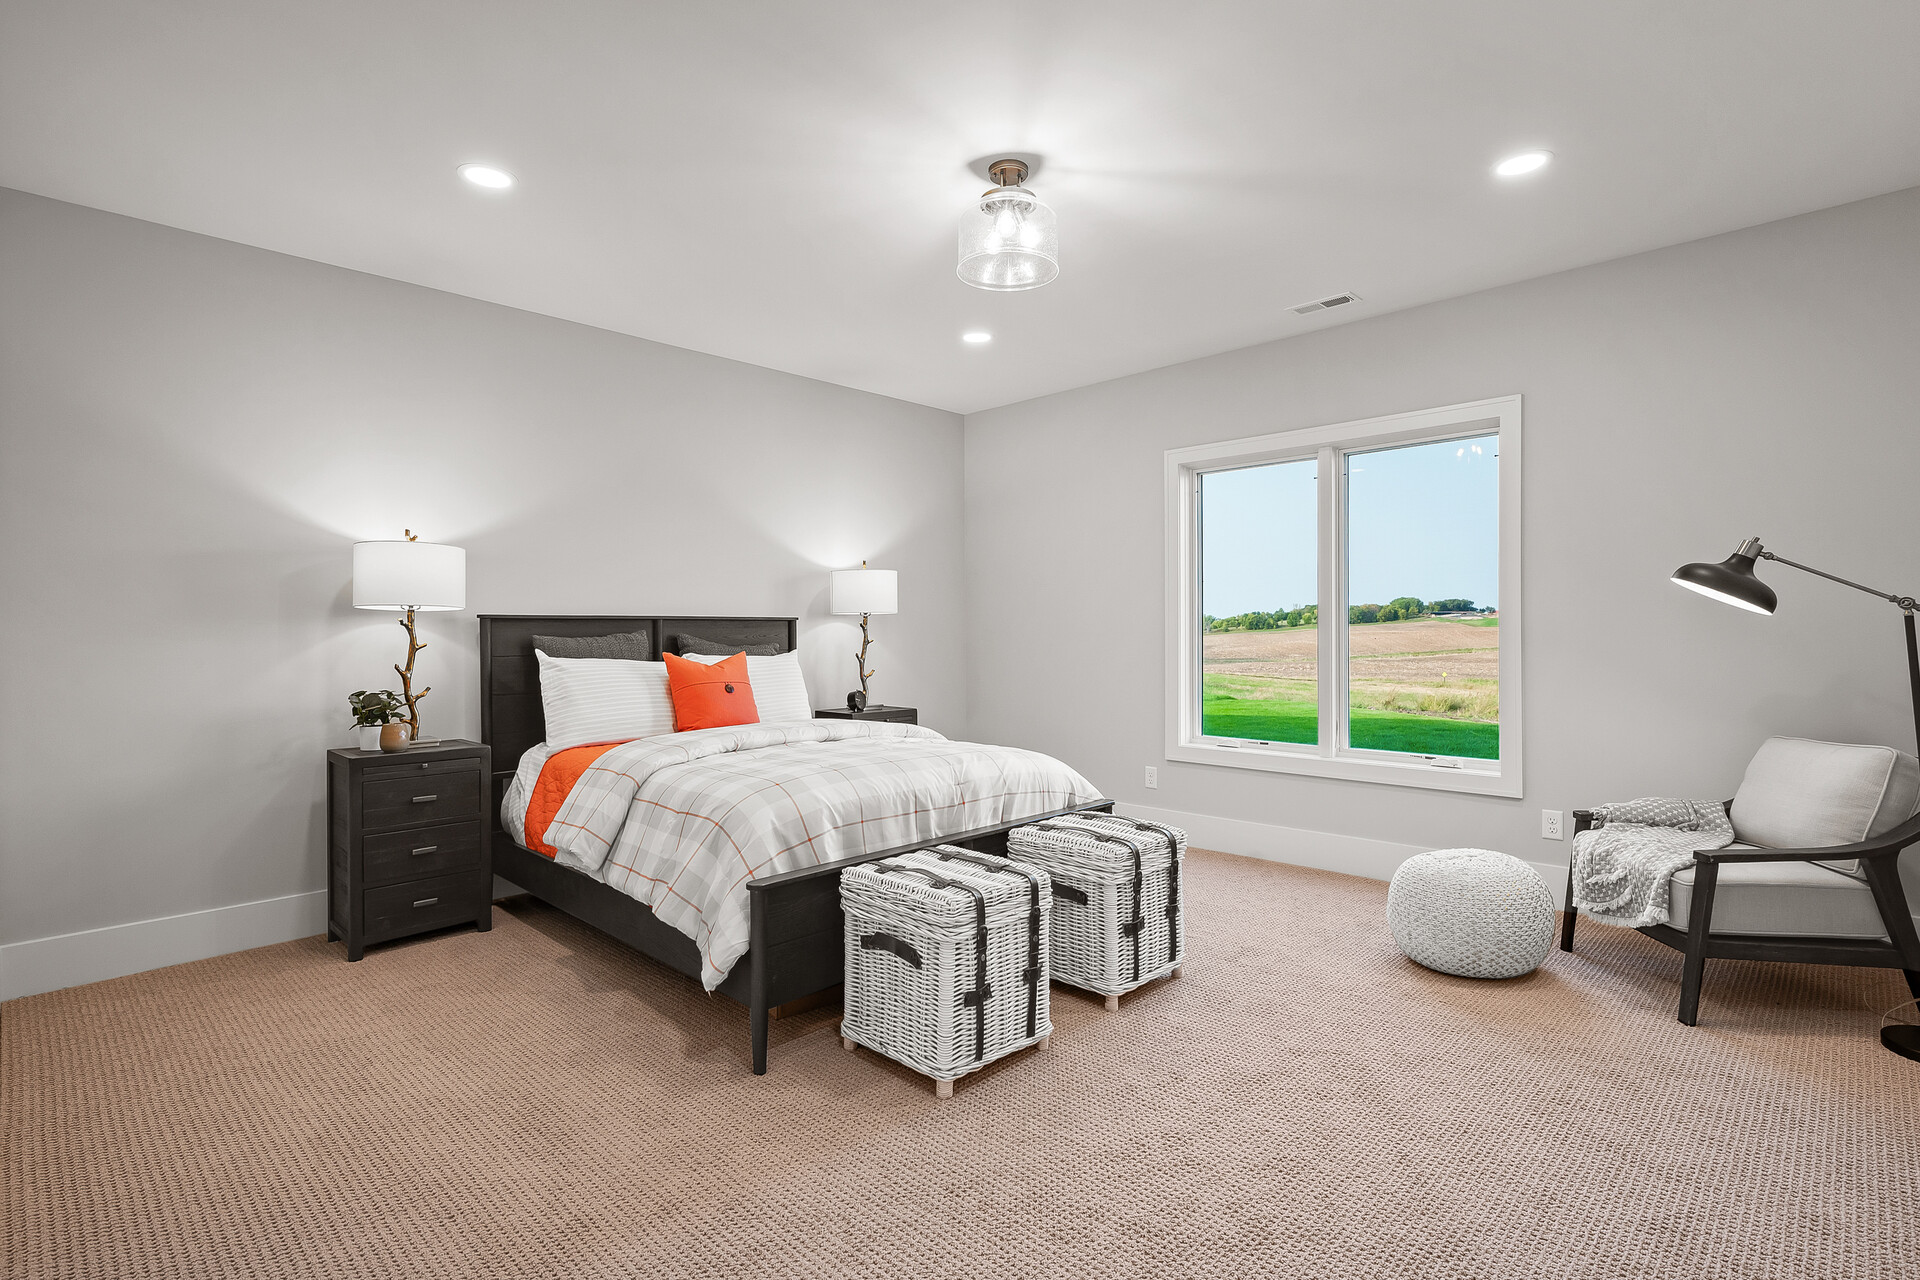 A prairie transitional custom home with gray walls and orange accents.